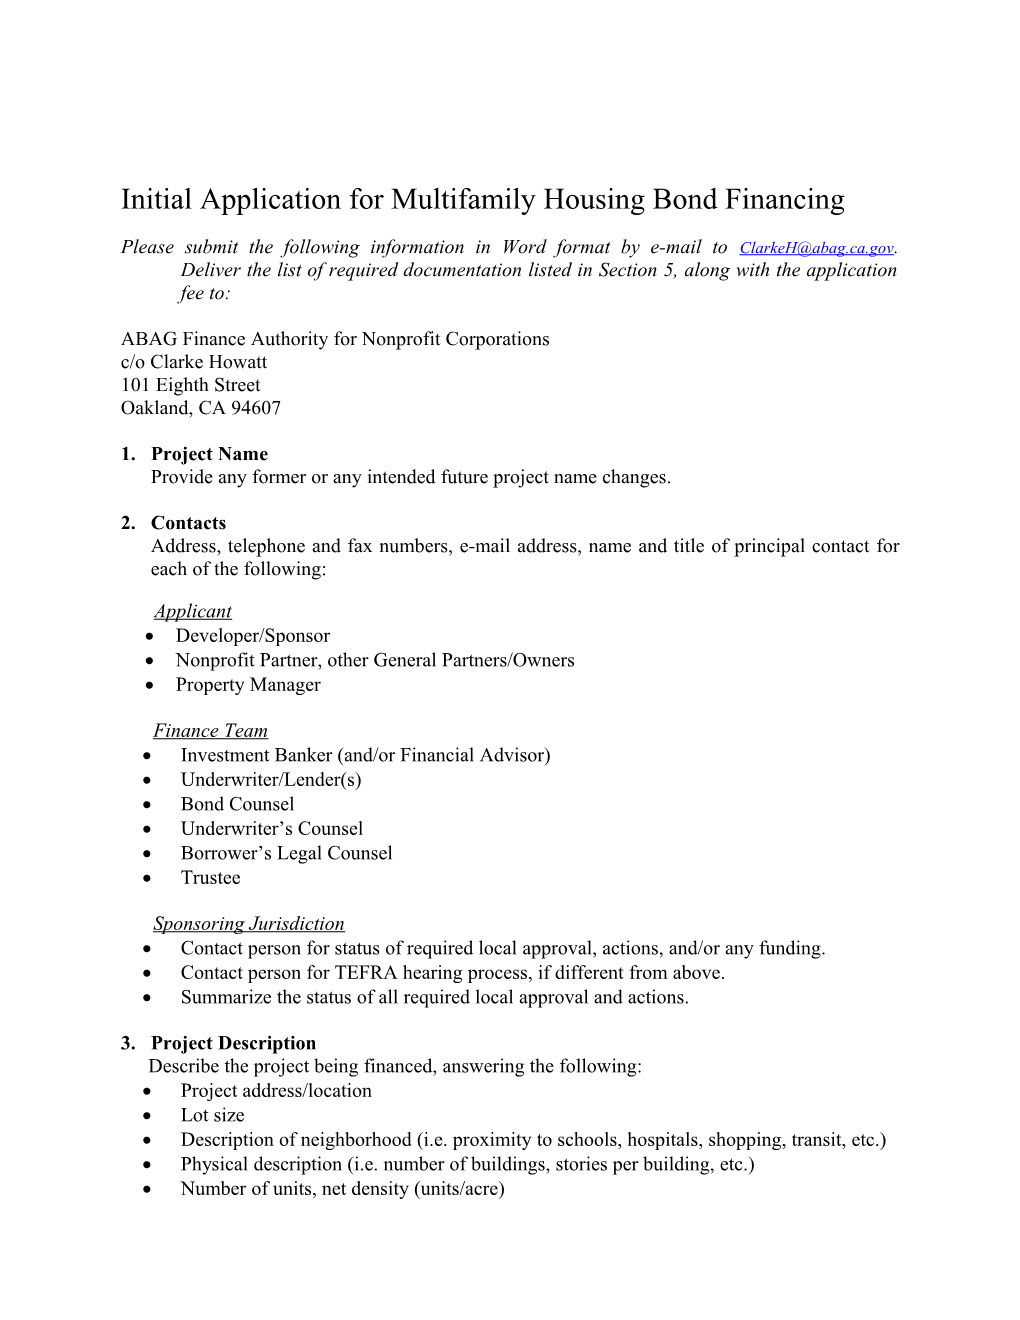 Initial Application for Affordable Housing Project